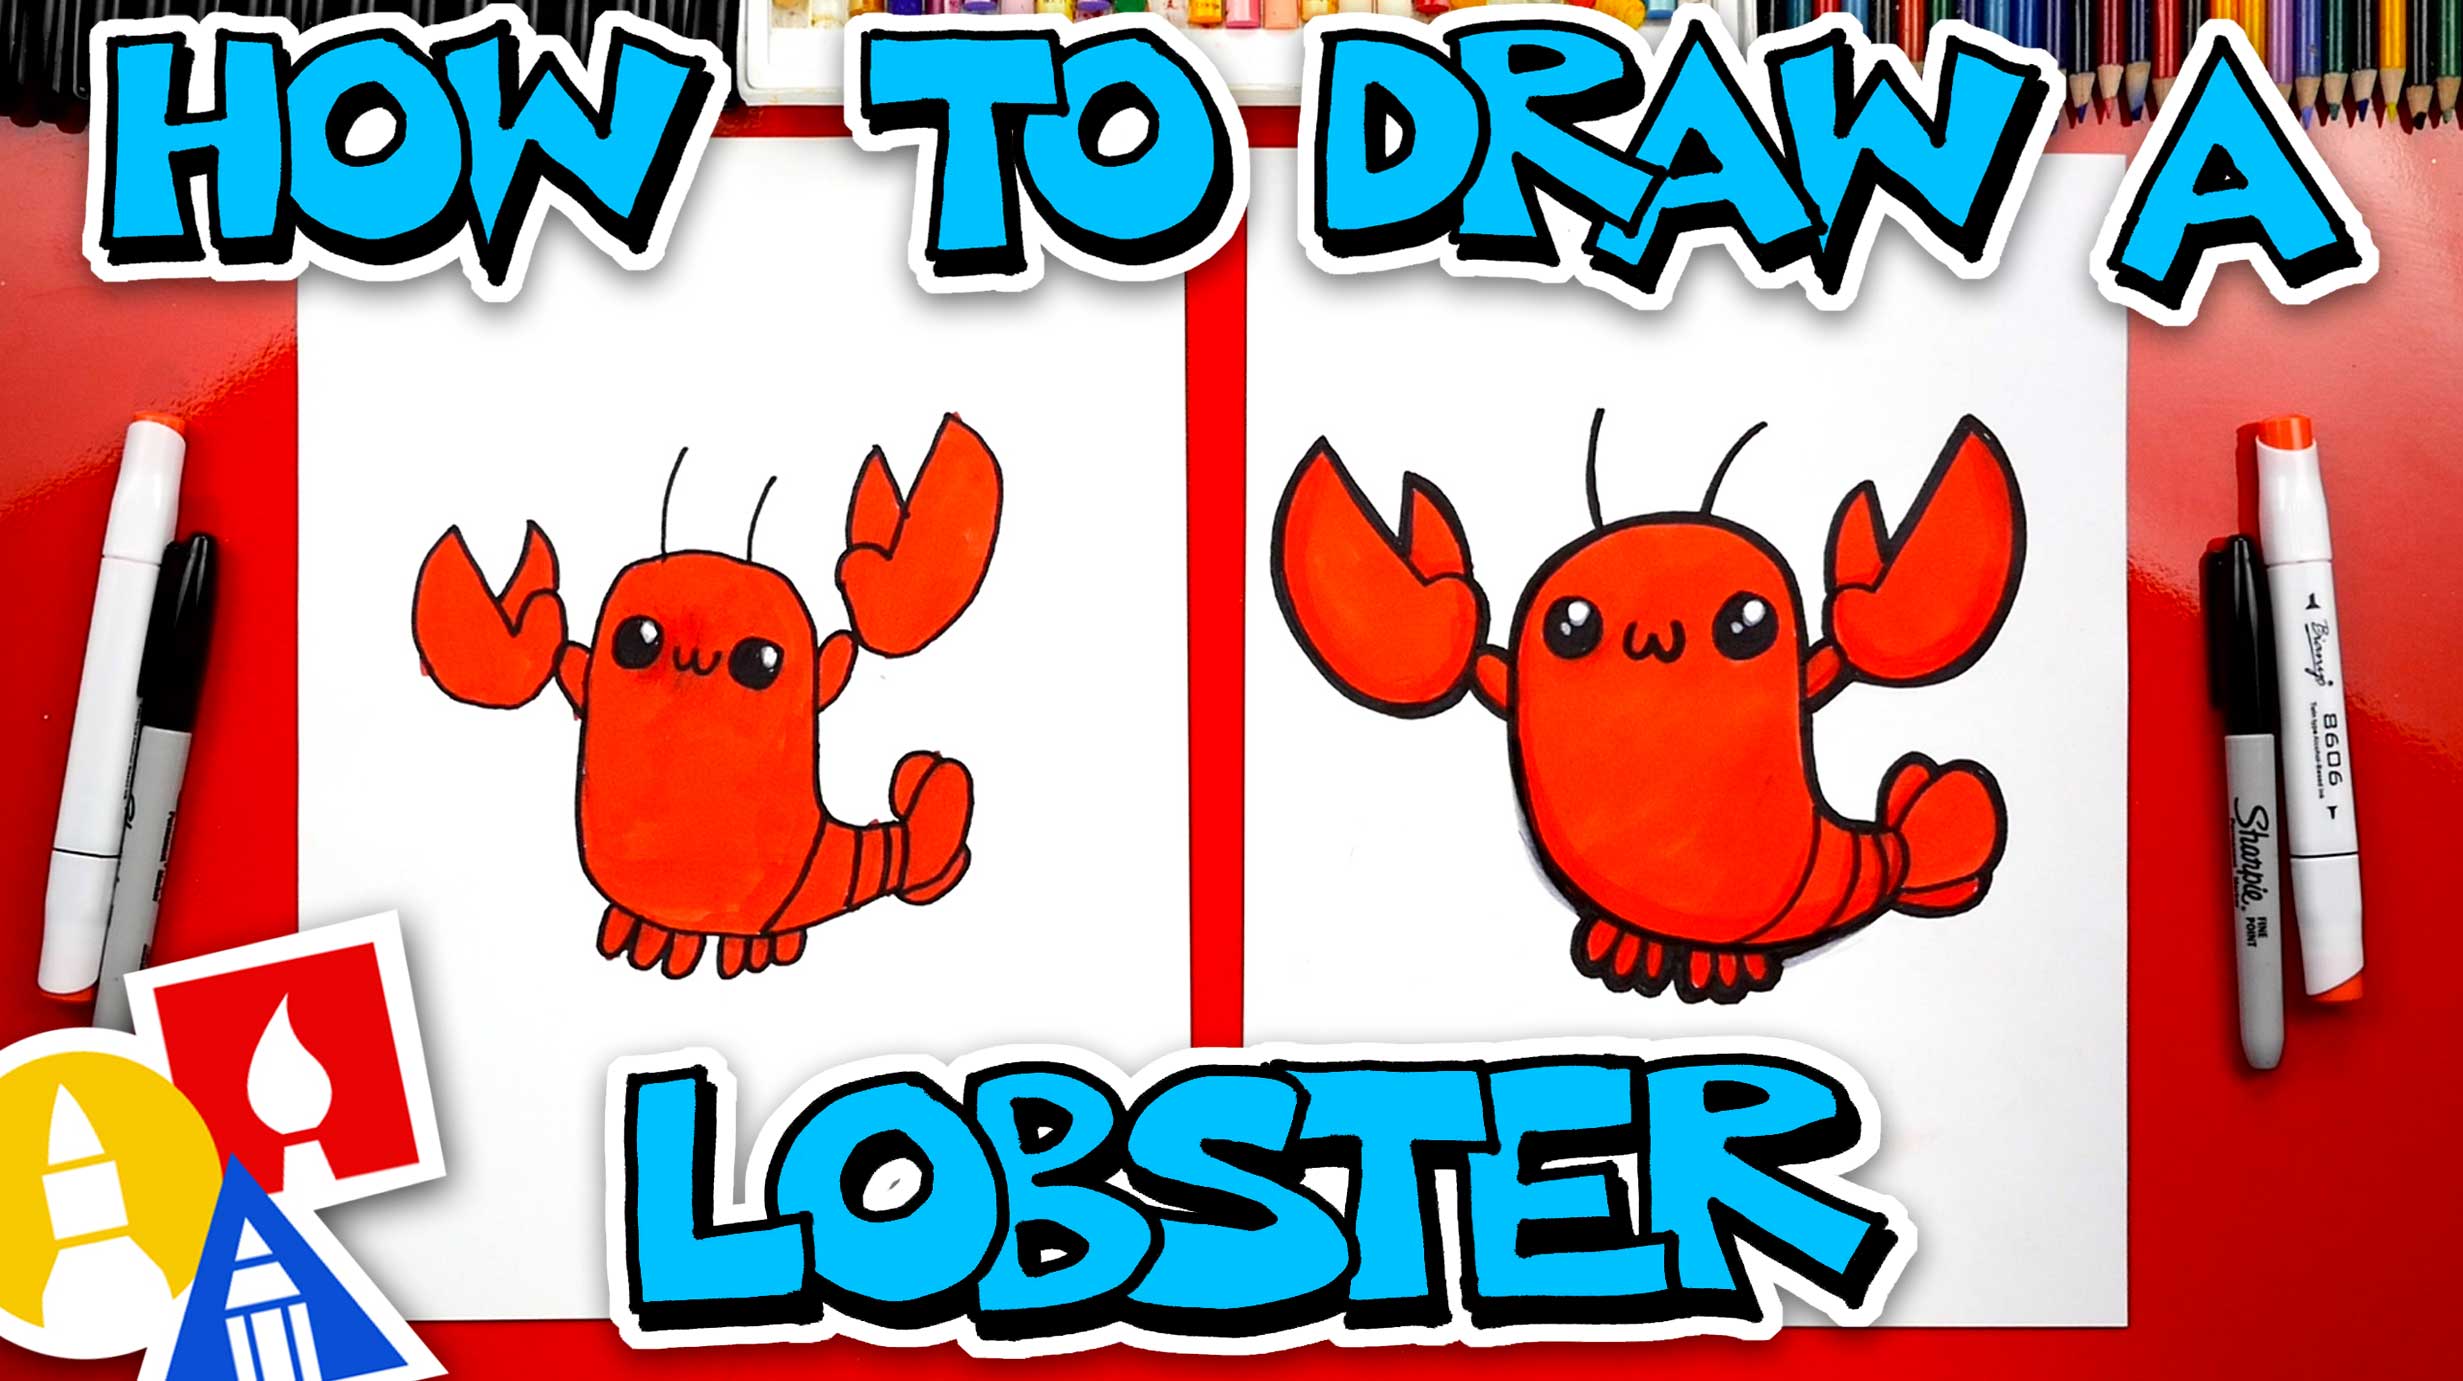 How To Draw A Lobster - Art For Kids Hub 